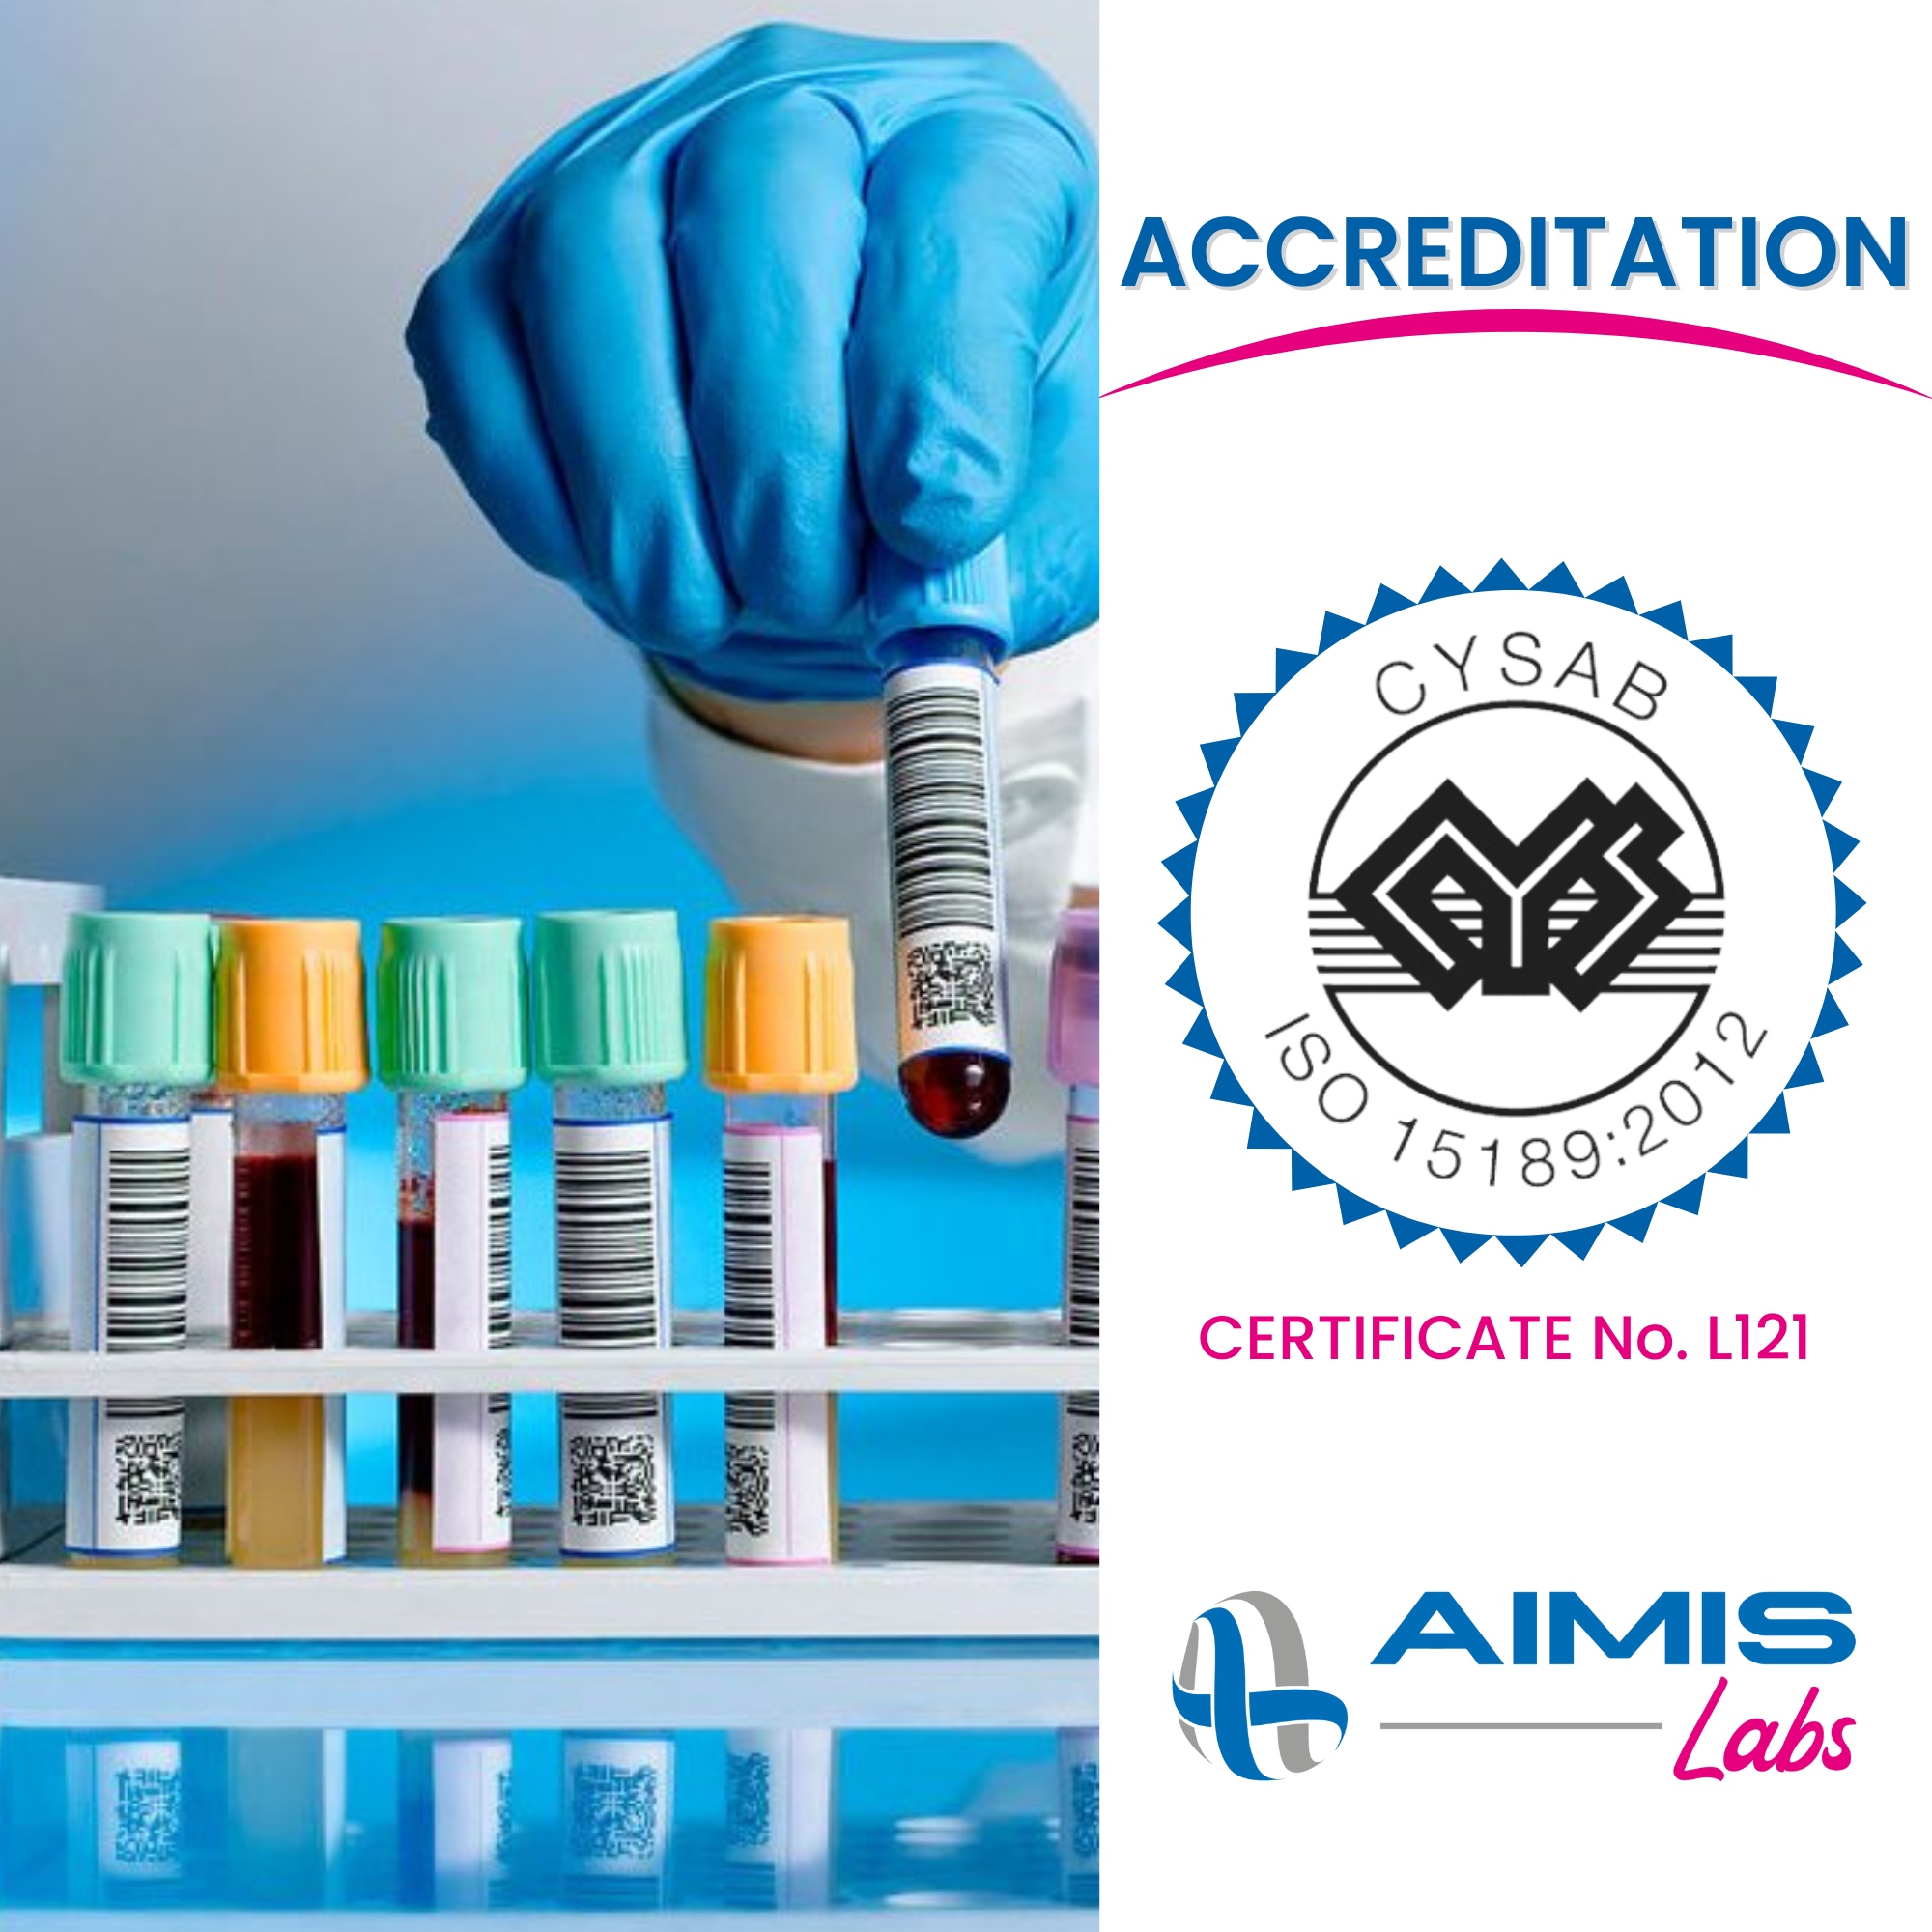 AIMIS Labs is now accredited with the clinical laboratory quality management system ISO 15189:2012